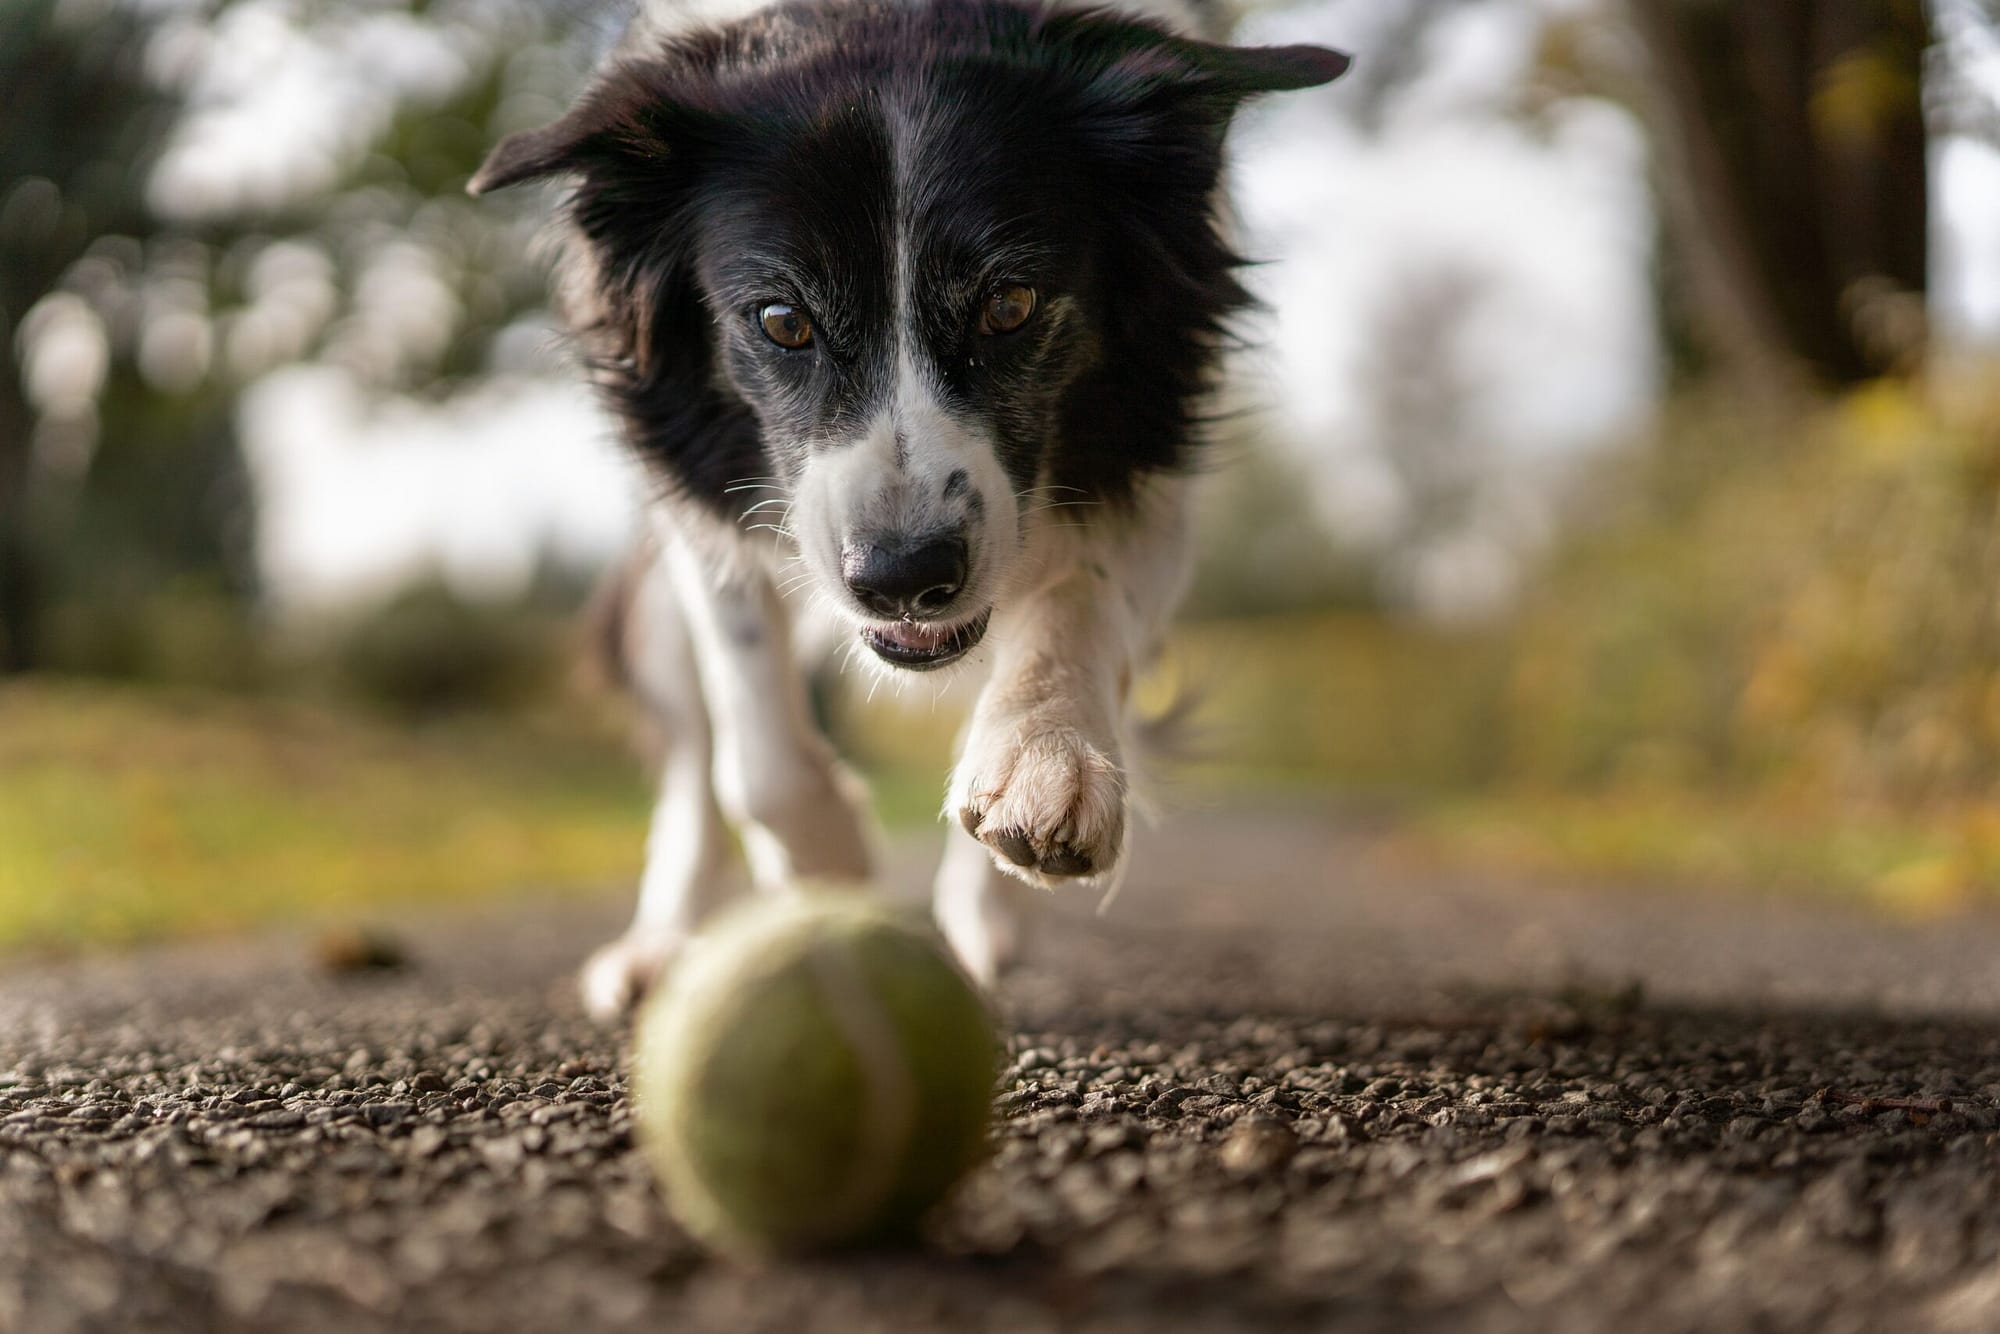 Why do dogs love to chase balls?